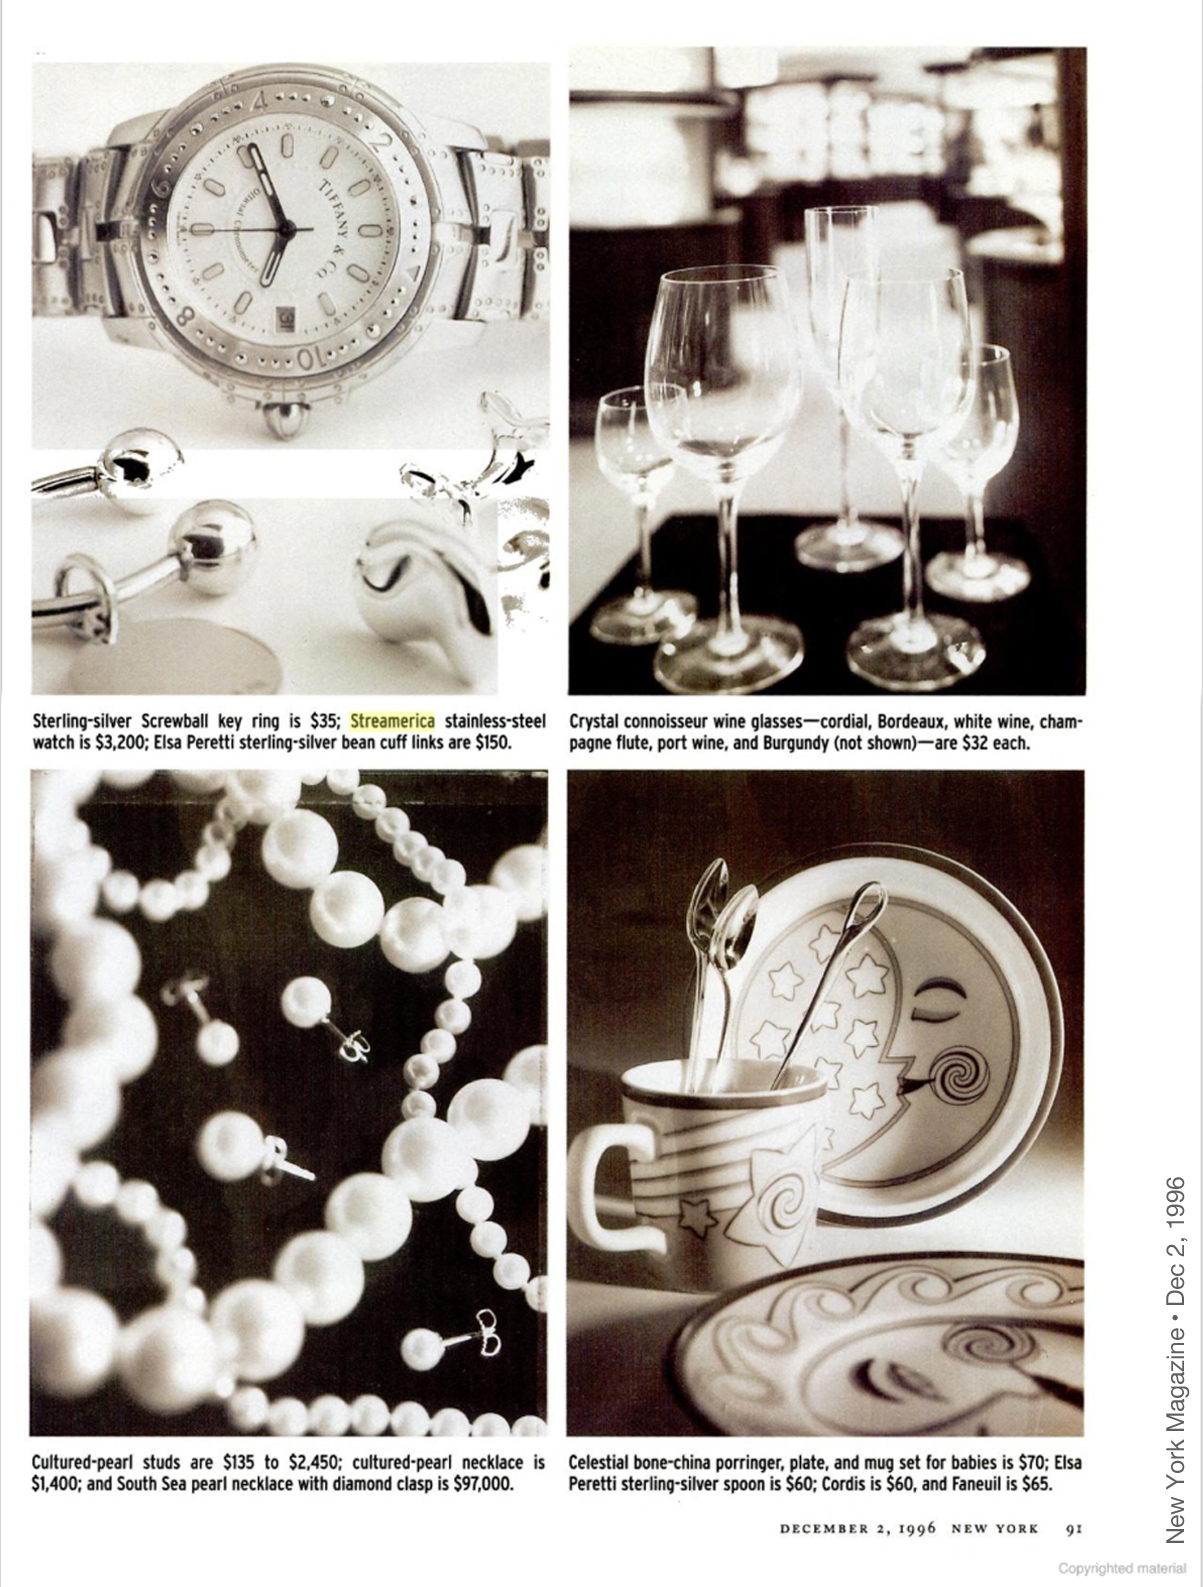 Tiffany & Co. Streamerica Stainless Steel Collection Advertisements Watch editorial Ads New York Magazine 1996  Prices Price Worth